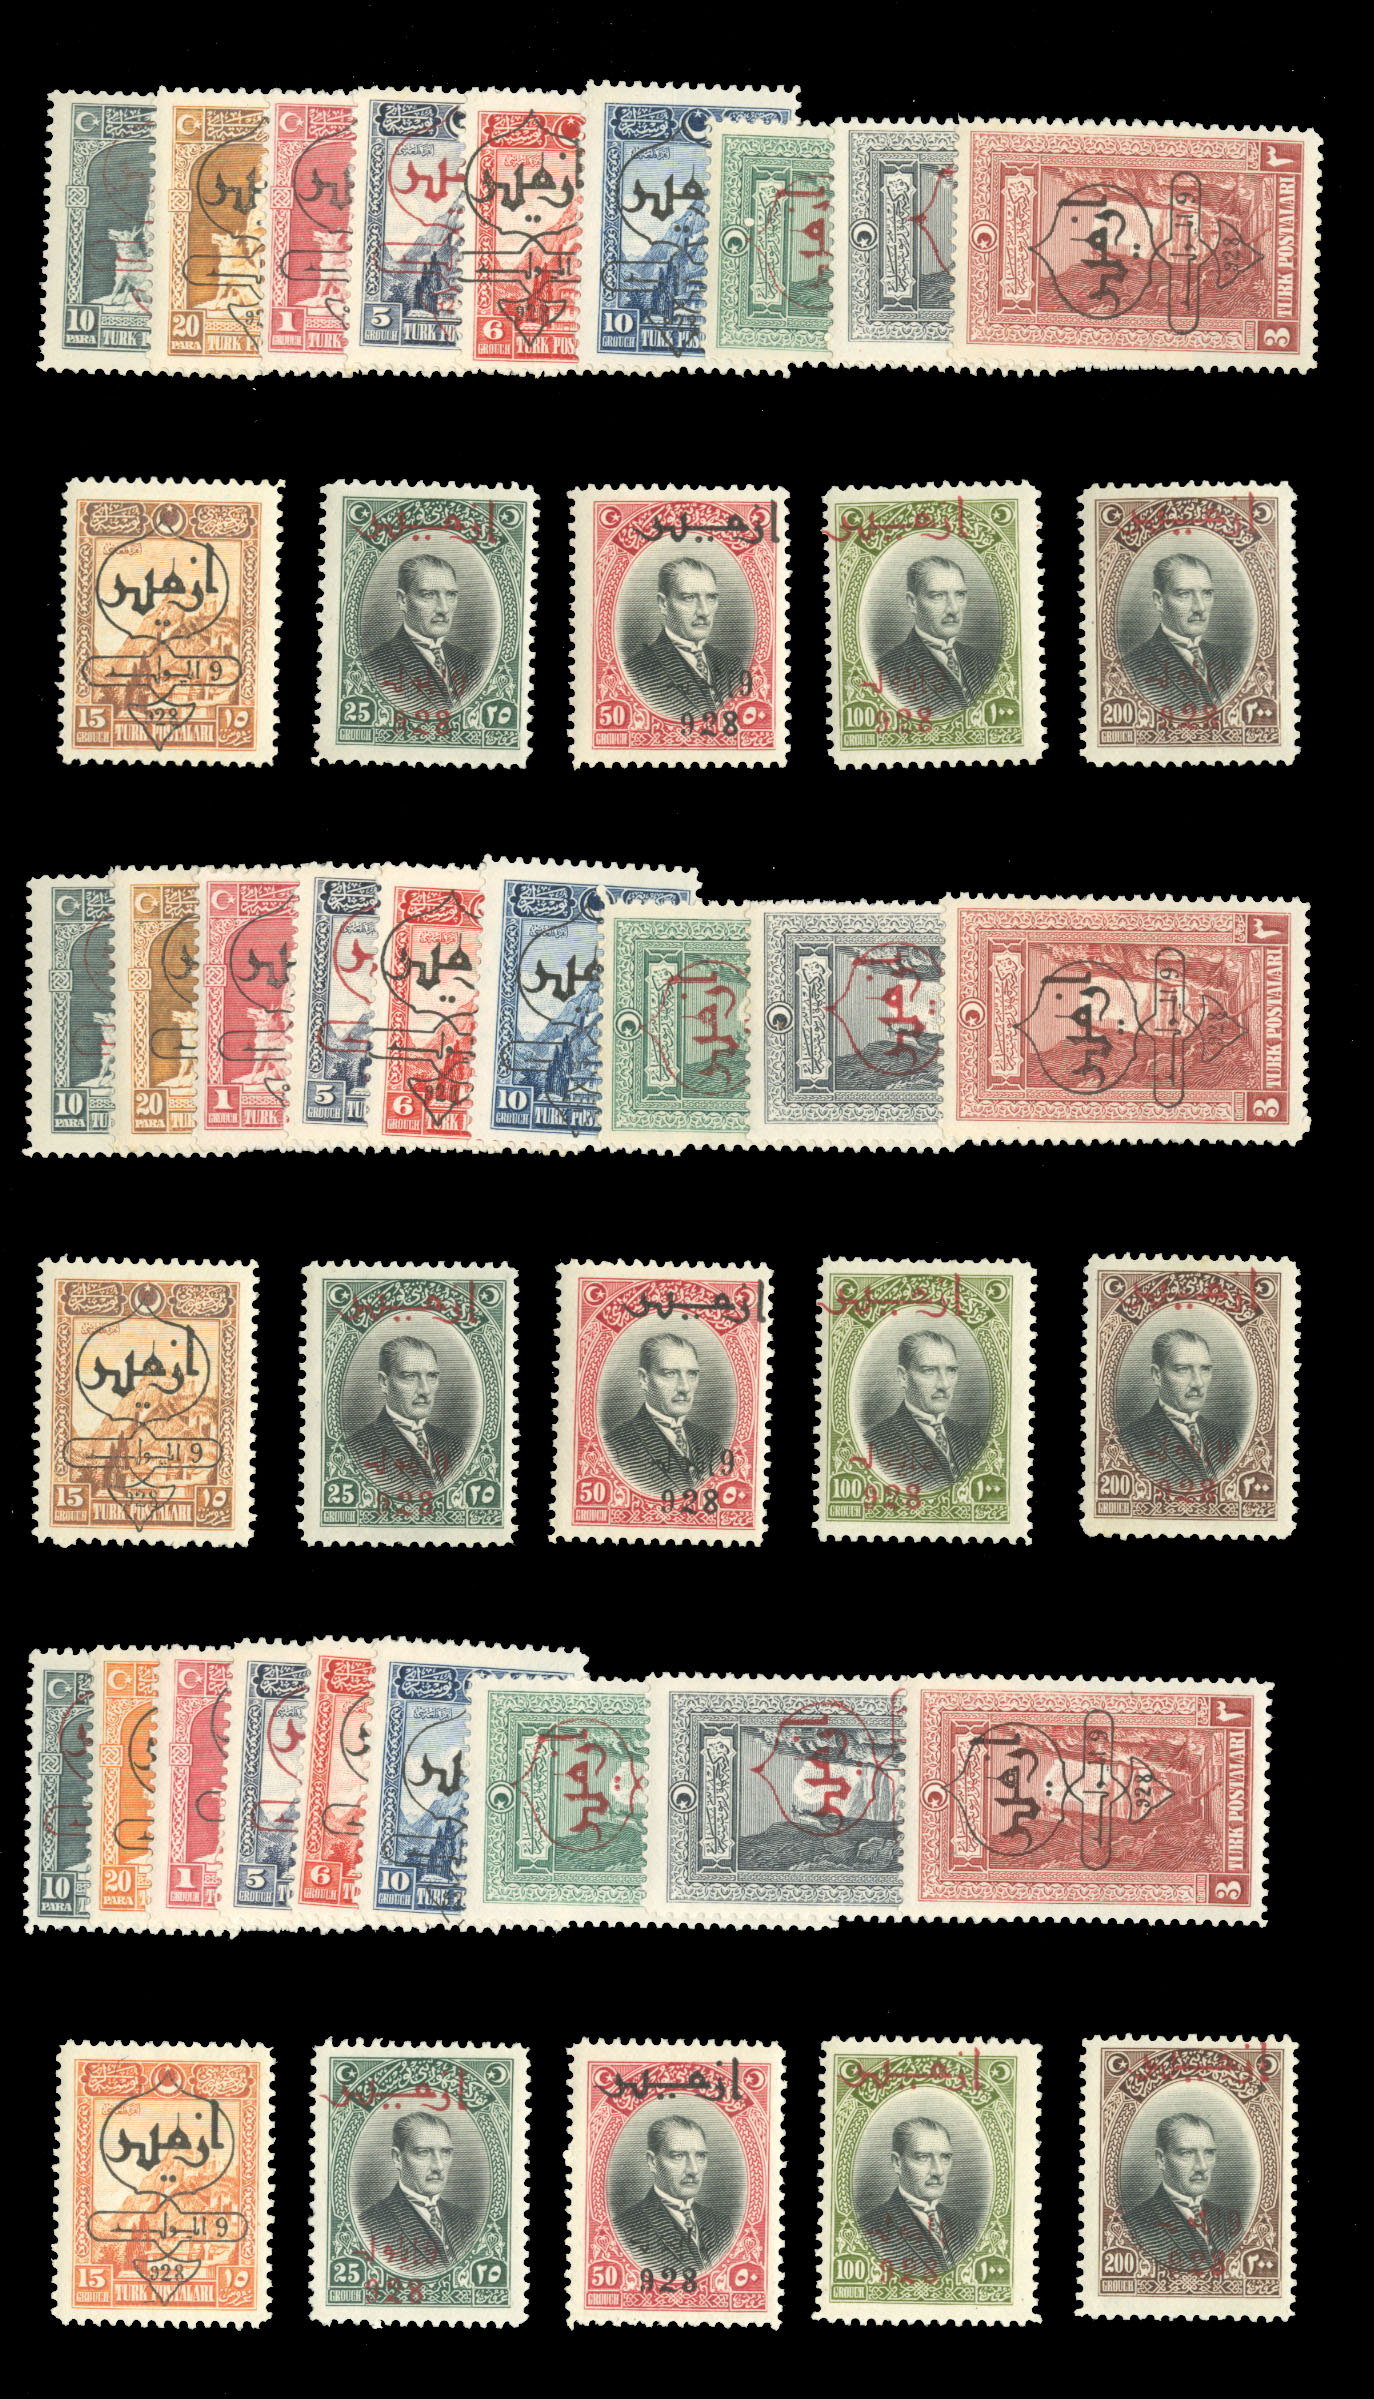 Lot 1350 - LARGE LOTS AND COLLECTIONS ALBANIA  -  Cherrystone Auctions U.S. & Worldwide Stamps & Postal History